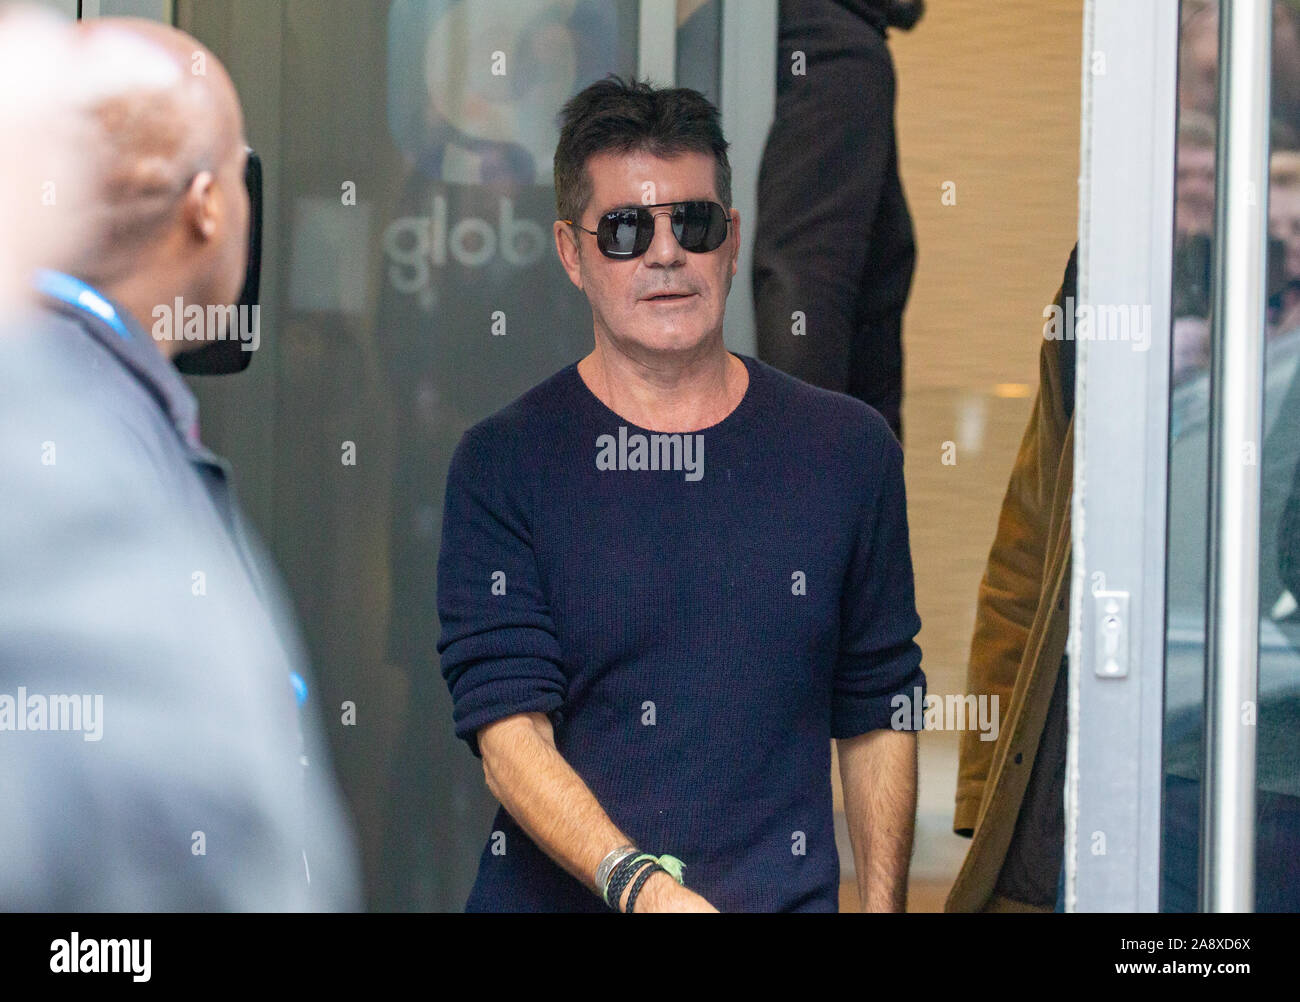 Simon Cowell, Television, music and Talent Show judge, producer and businessman, leaves the Studios of Heart FM after giving an interview. Stock Photo